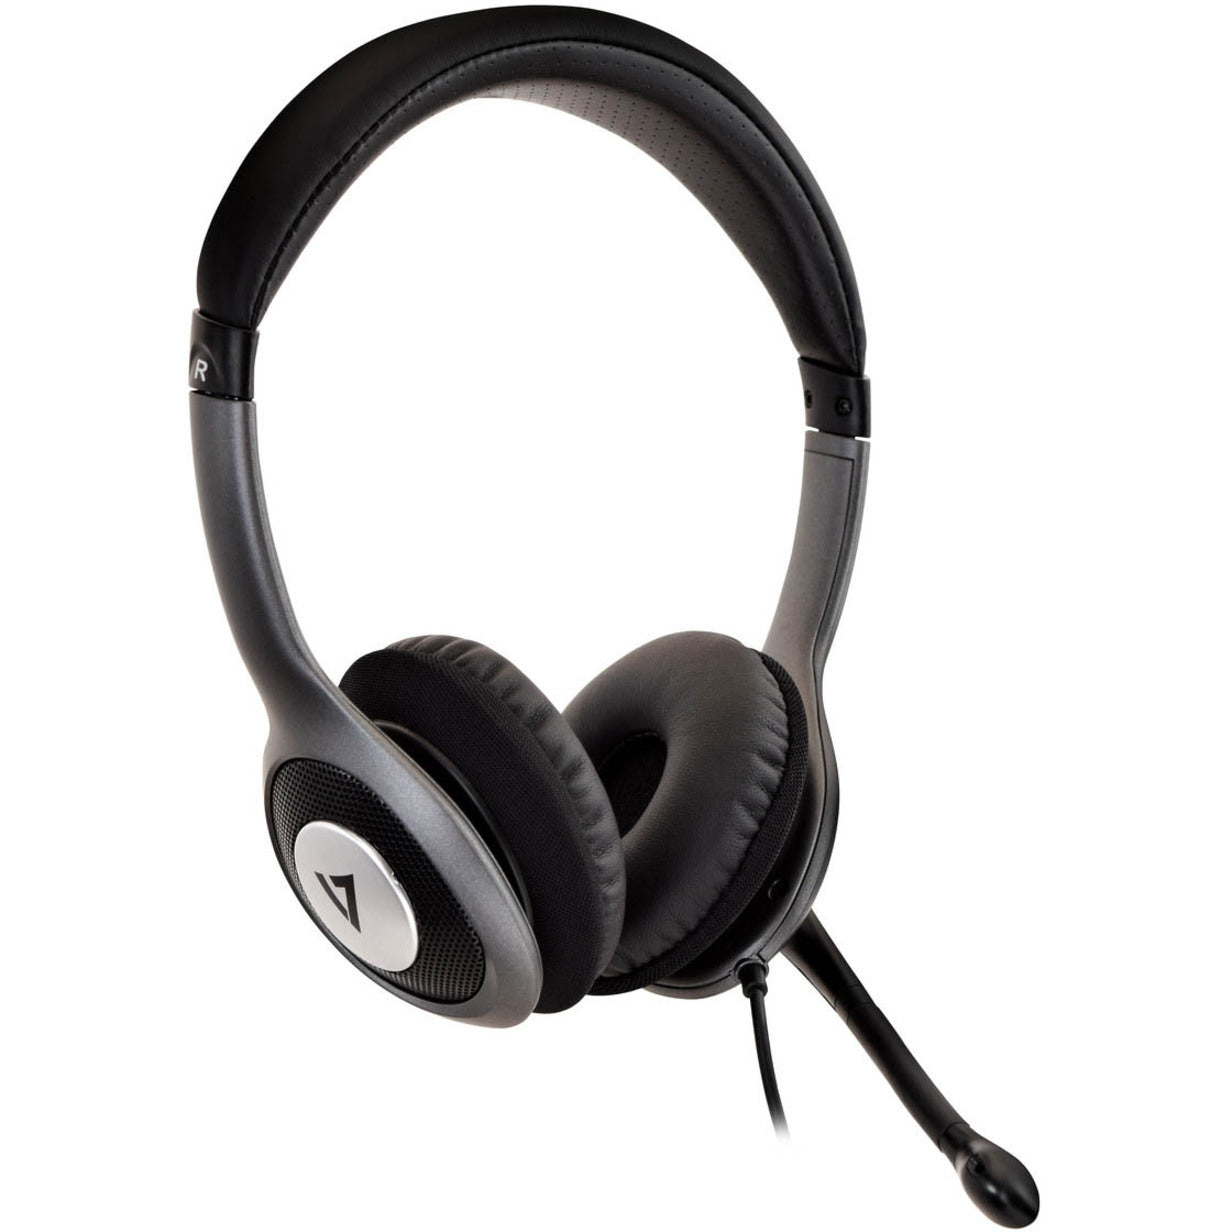 V7 HU521-2NP Deluxe USB Stereo Headphones with Microphone, Over-the-head, Noise Cancelling, 2 Year Warranty